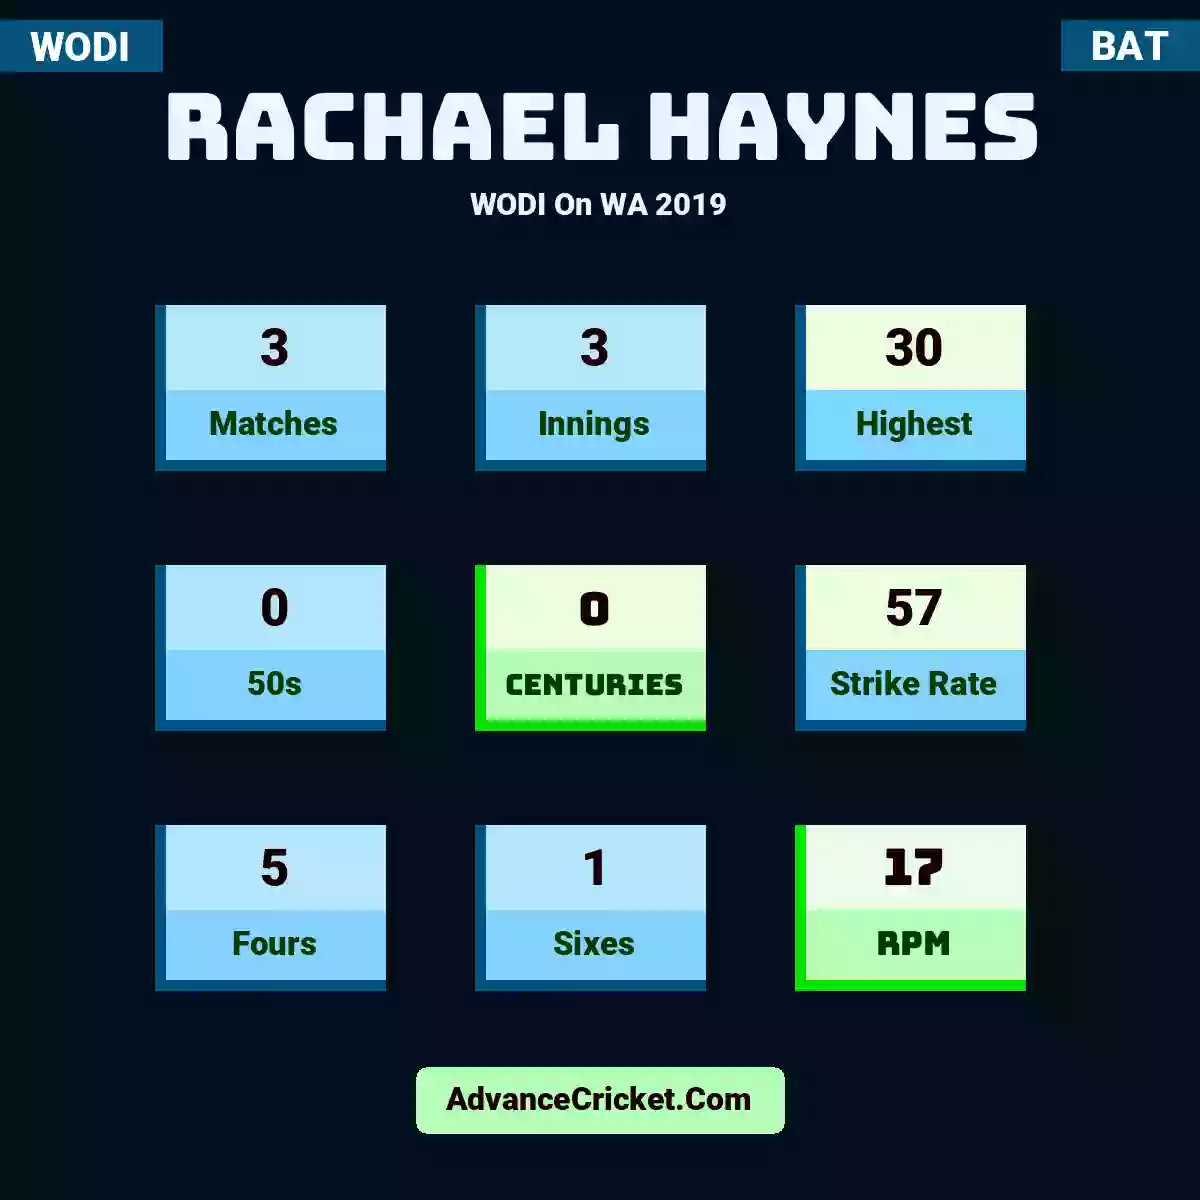 Rachael Haynes WODI  On WA 2019, Rachael Haynes played 3 matches, scored 30 runs as highest, 0 half-centuries, and 0 centuries, with a strike rate of 57. R.Haynes hit 5 fours and 1 sixes, with an RPM of 17.